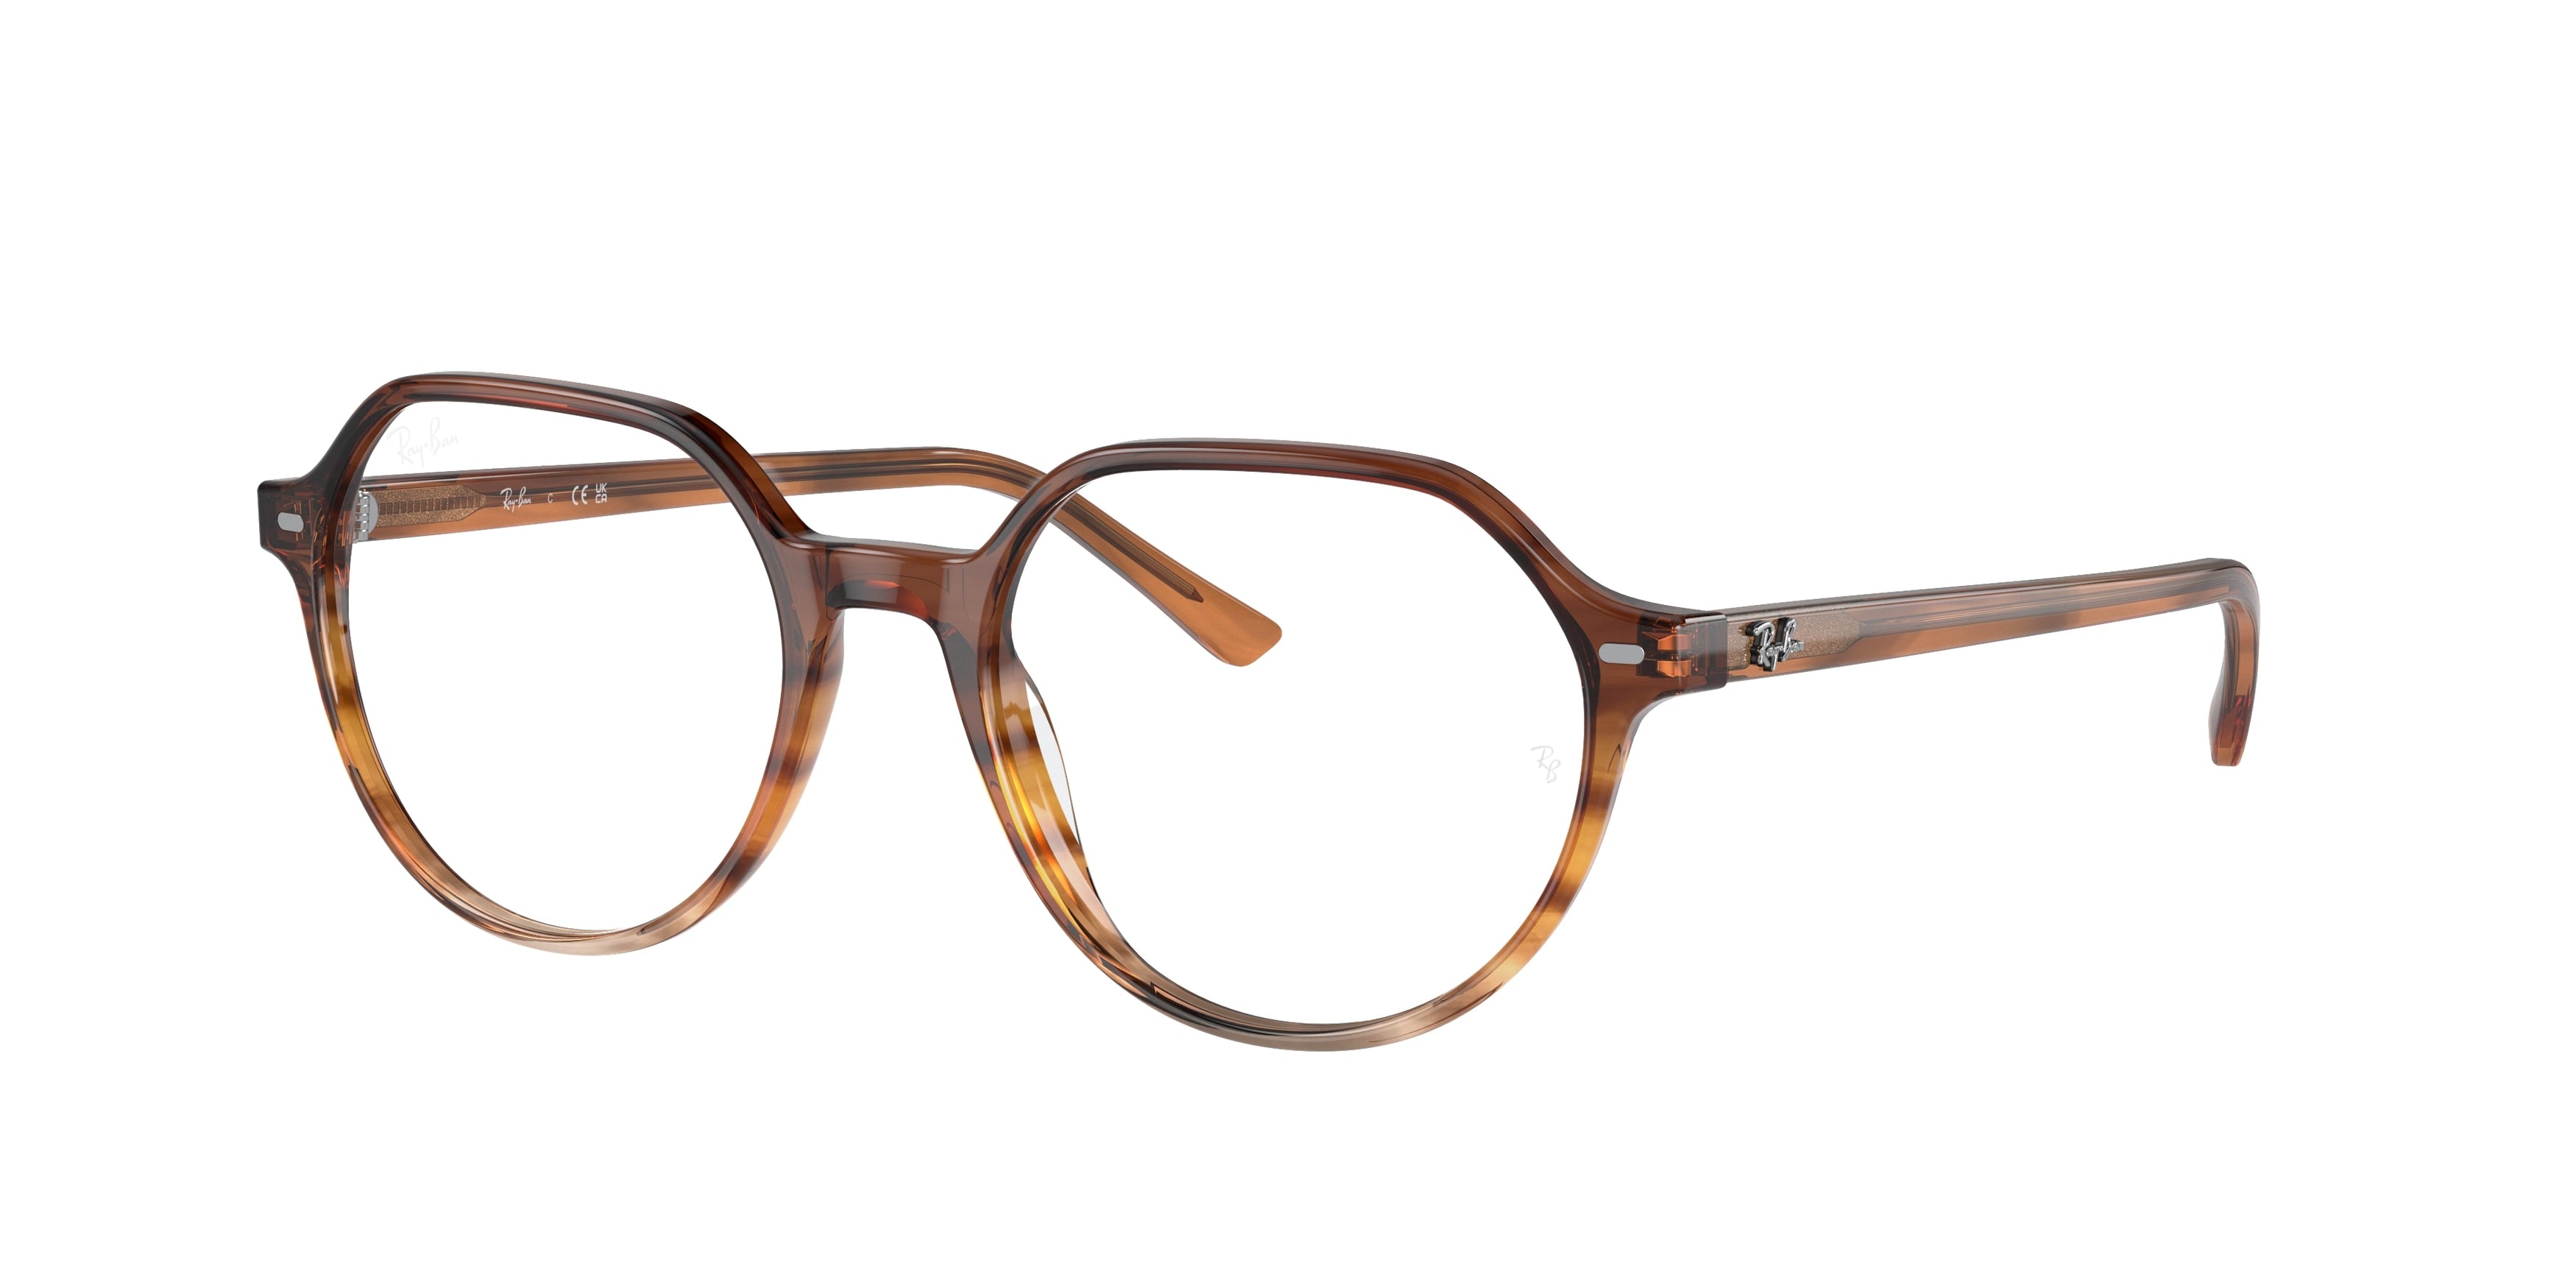 Ray-Ban Optical THALIA RX5395 Square Eyeglasses  8253-Striped Brown & Yellow 51-145-18 - Color Map Brown